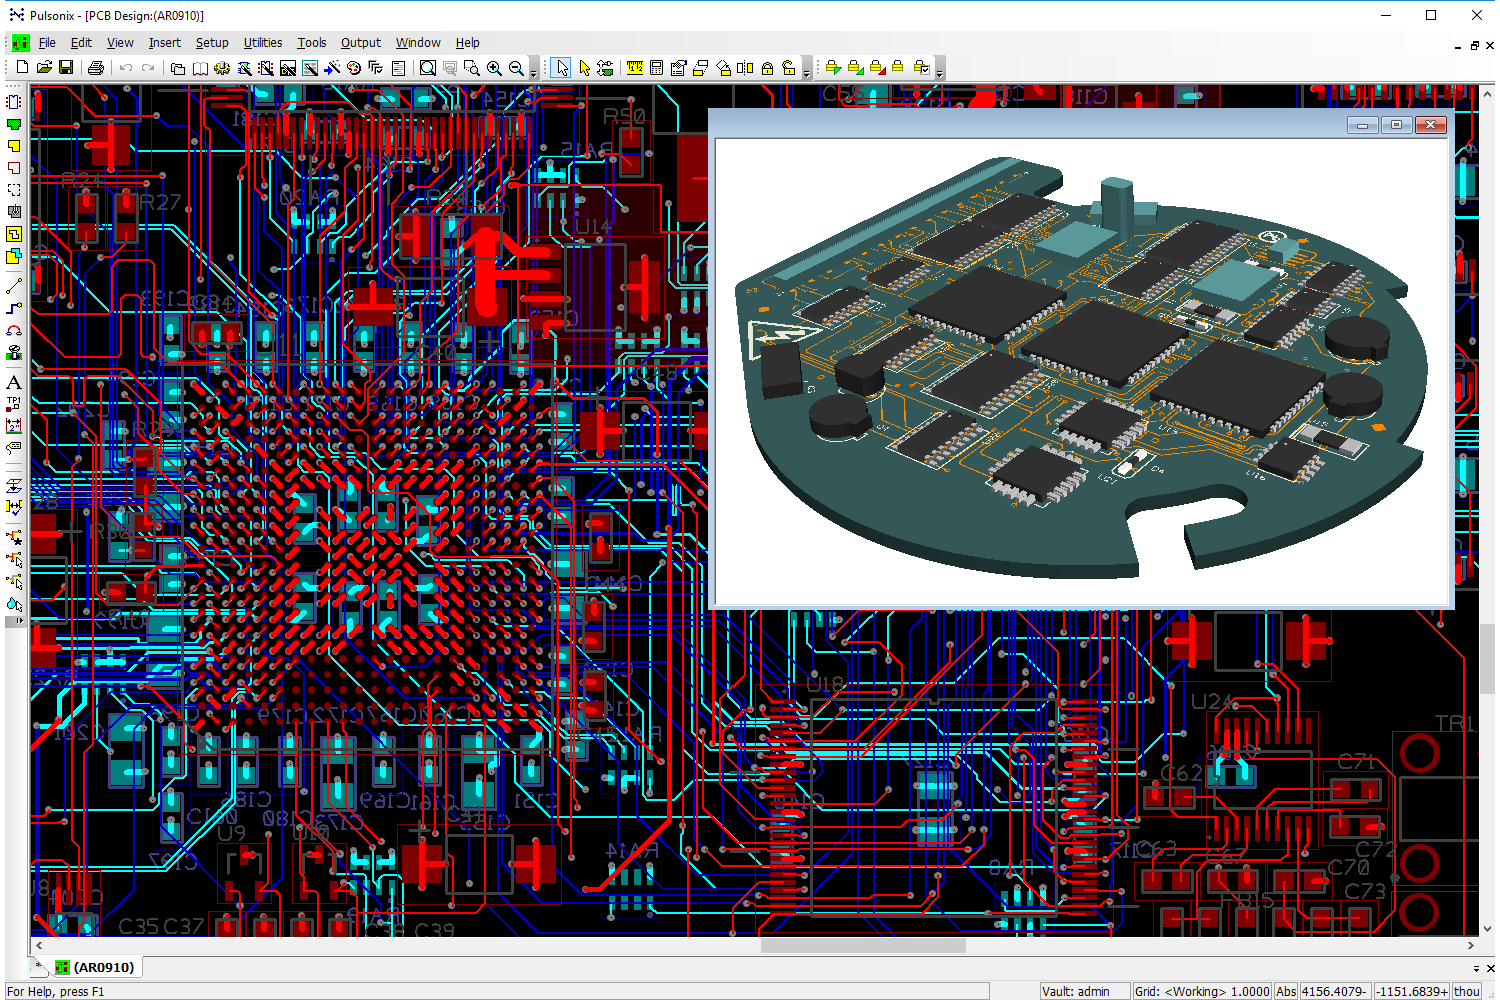 Pcb design software integrates revision control - Electronic Products &...